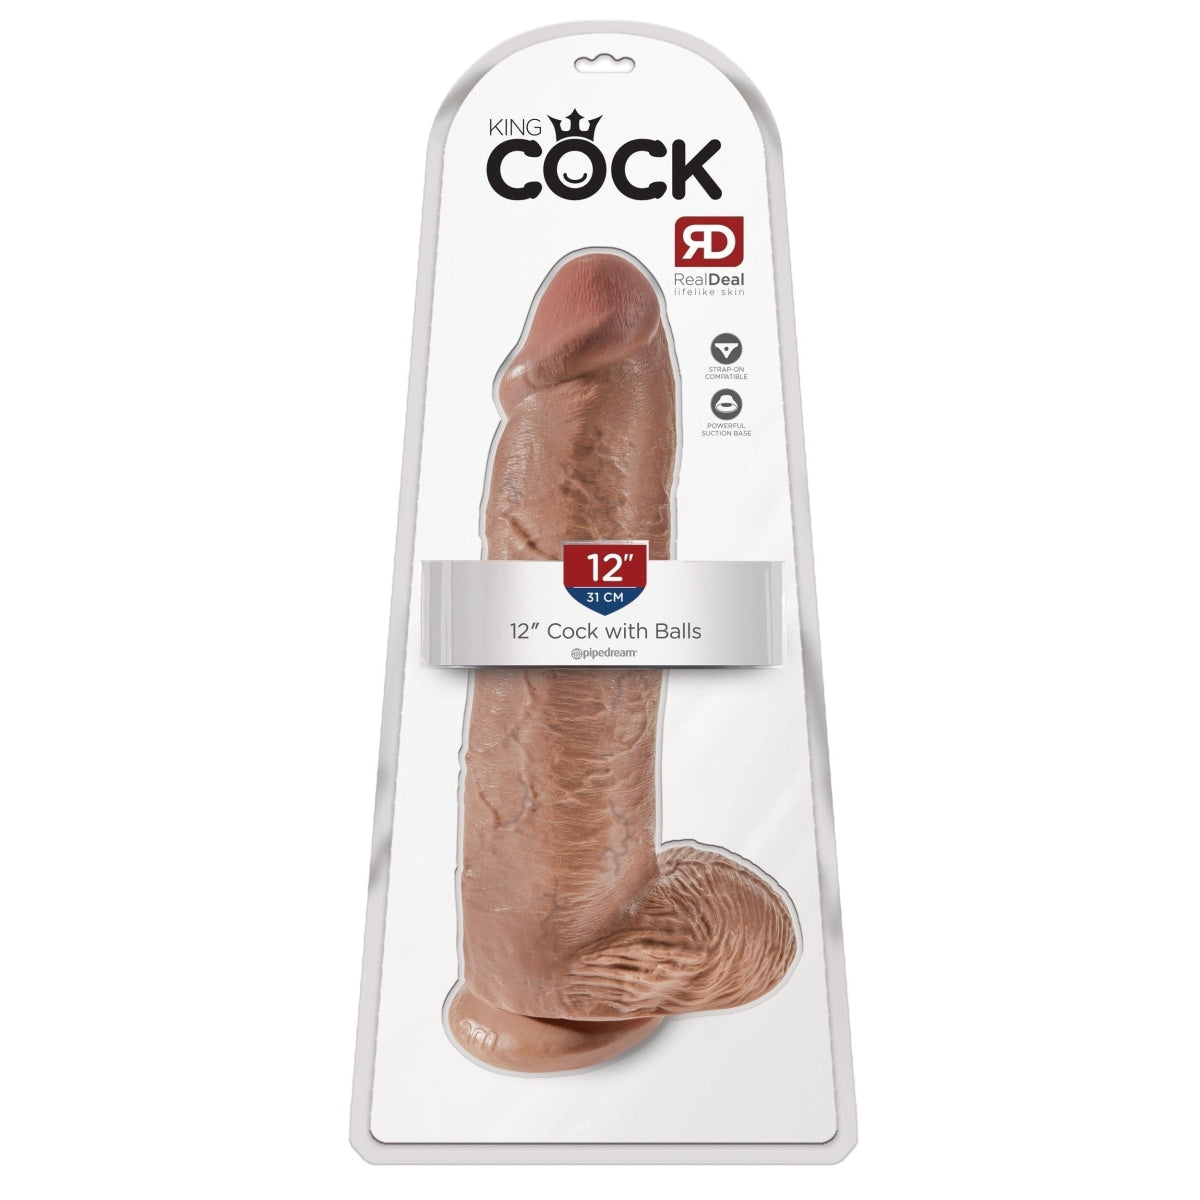 King Cock 12 In Cock W-balls Tan Intimates Adult Boutique